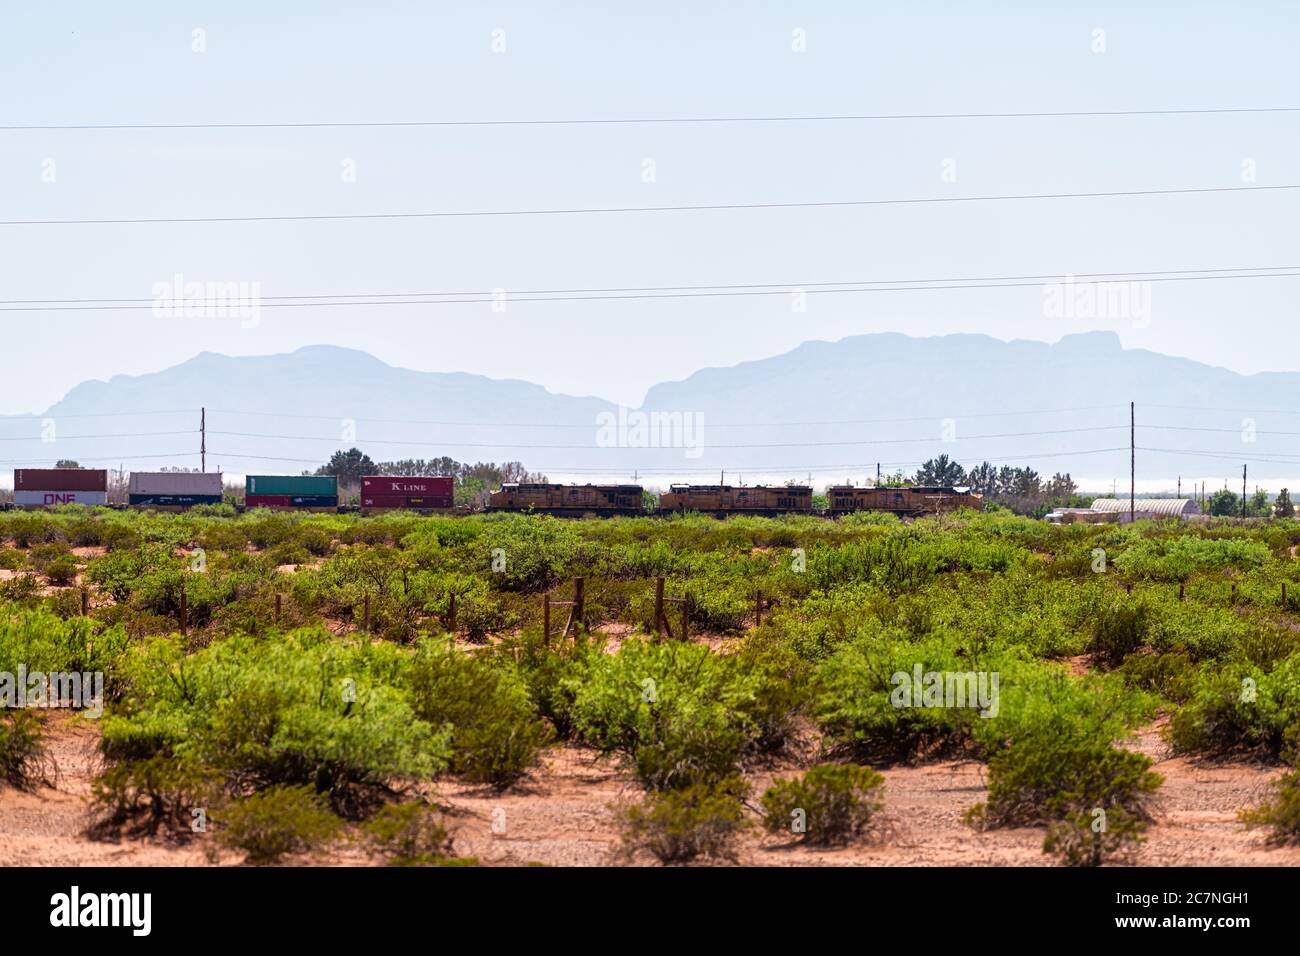 Tularosa, USA - June 8, 2019: New Mexico Sacramento Mountains silhouette in Otero county with cargo train on tracks and sign for Kline shipment Stock Photo